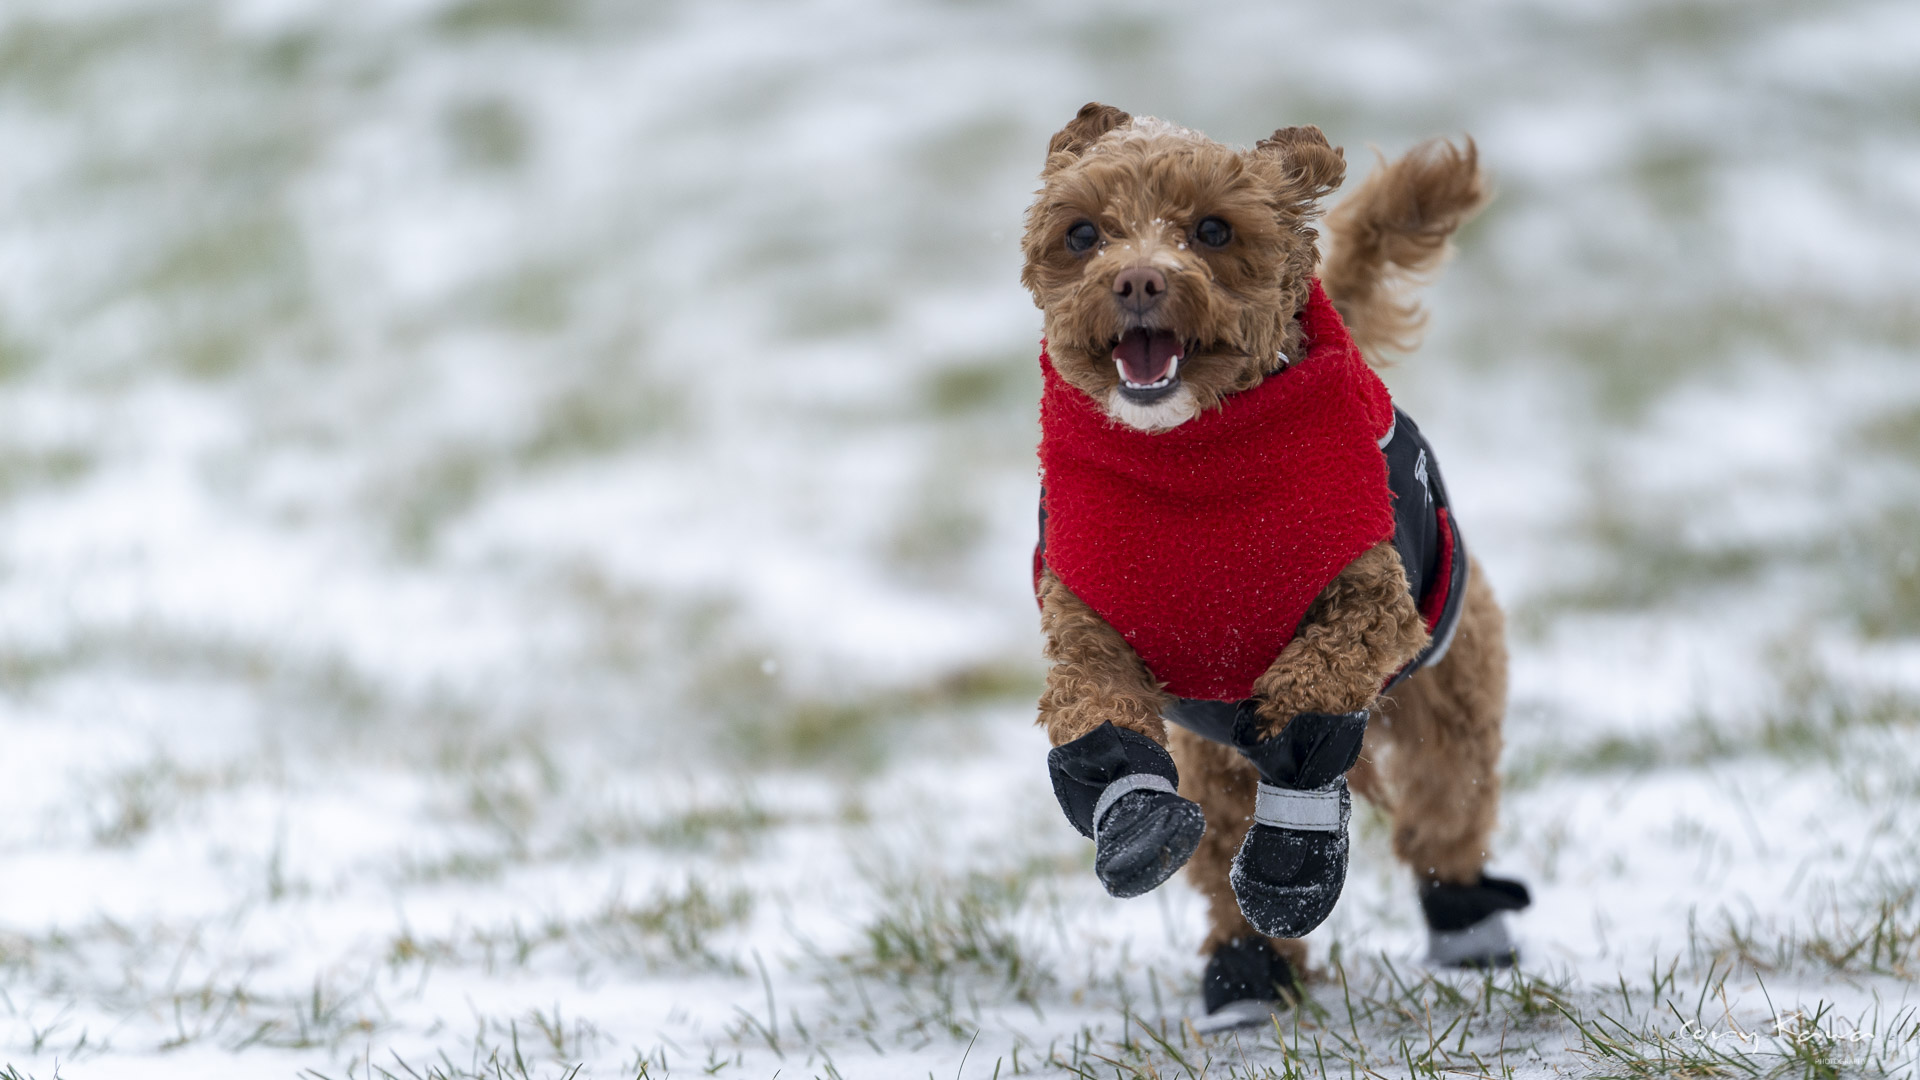 A small yorkie poo running through the snow